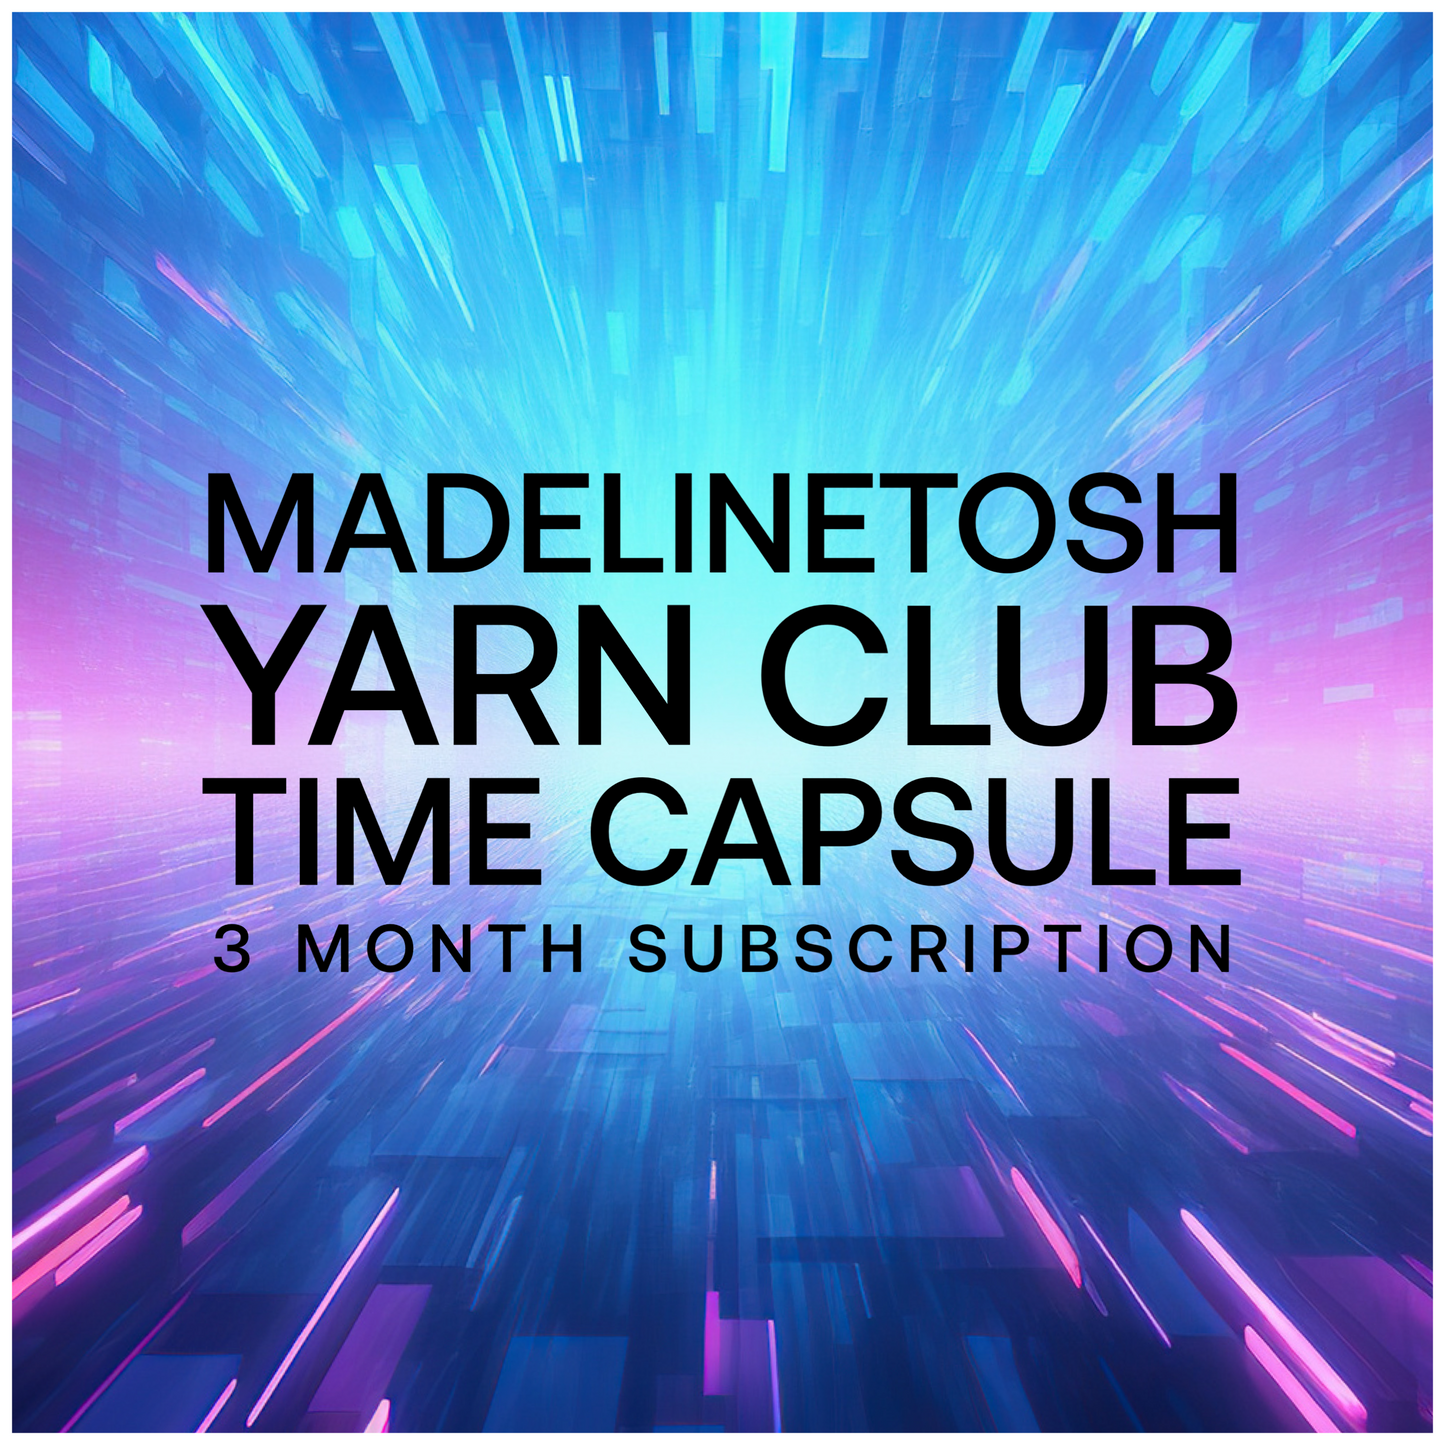 Madelinetosh Yarn Club | Time Capsule | 3 Month Subscription